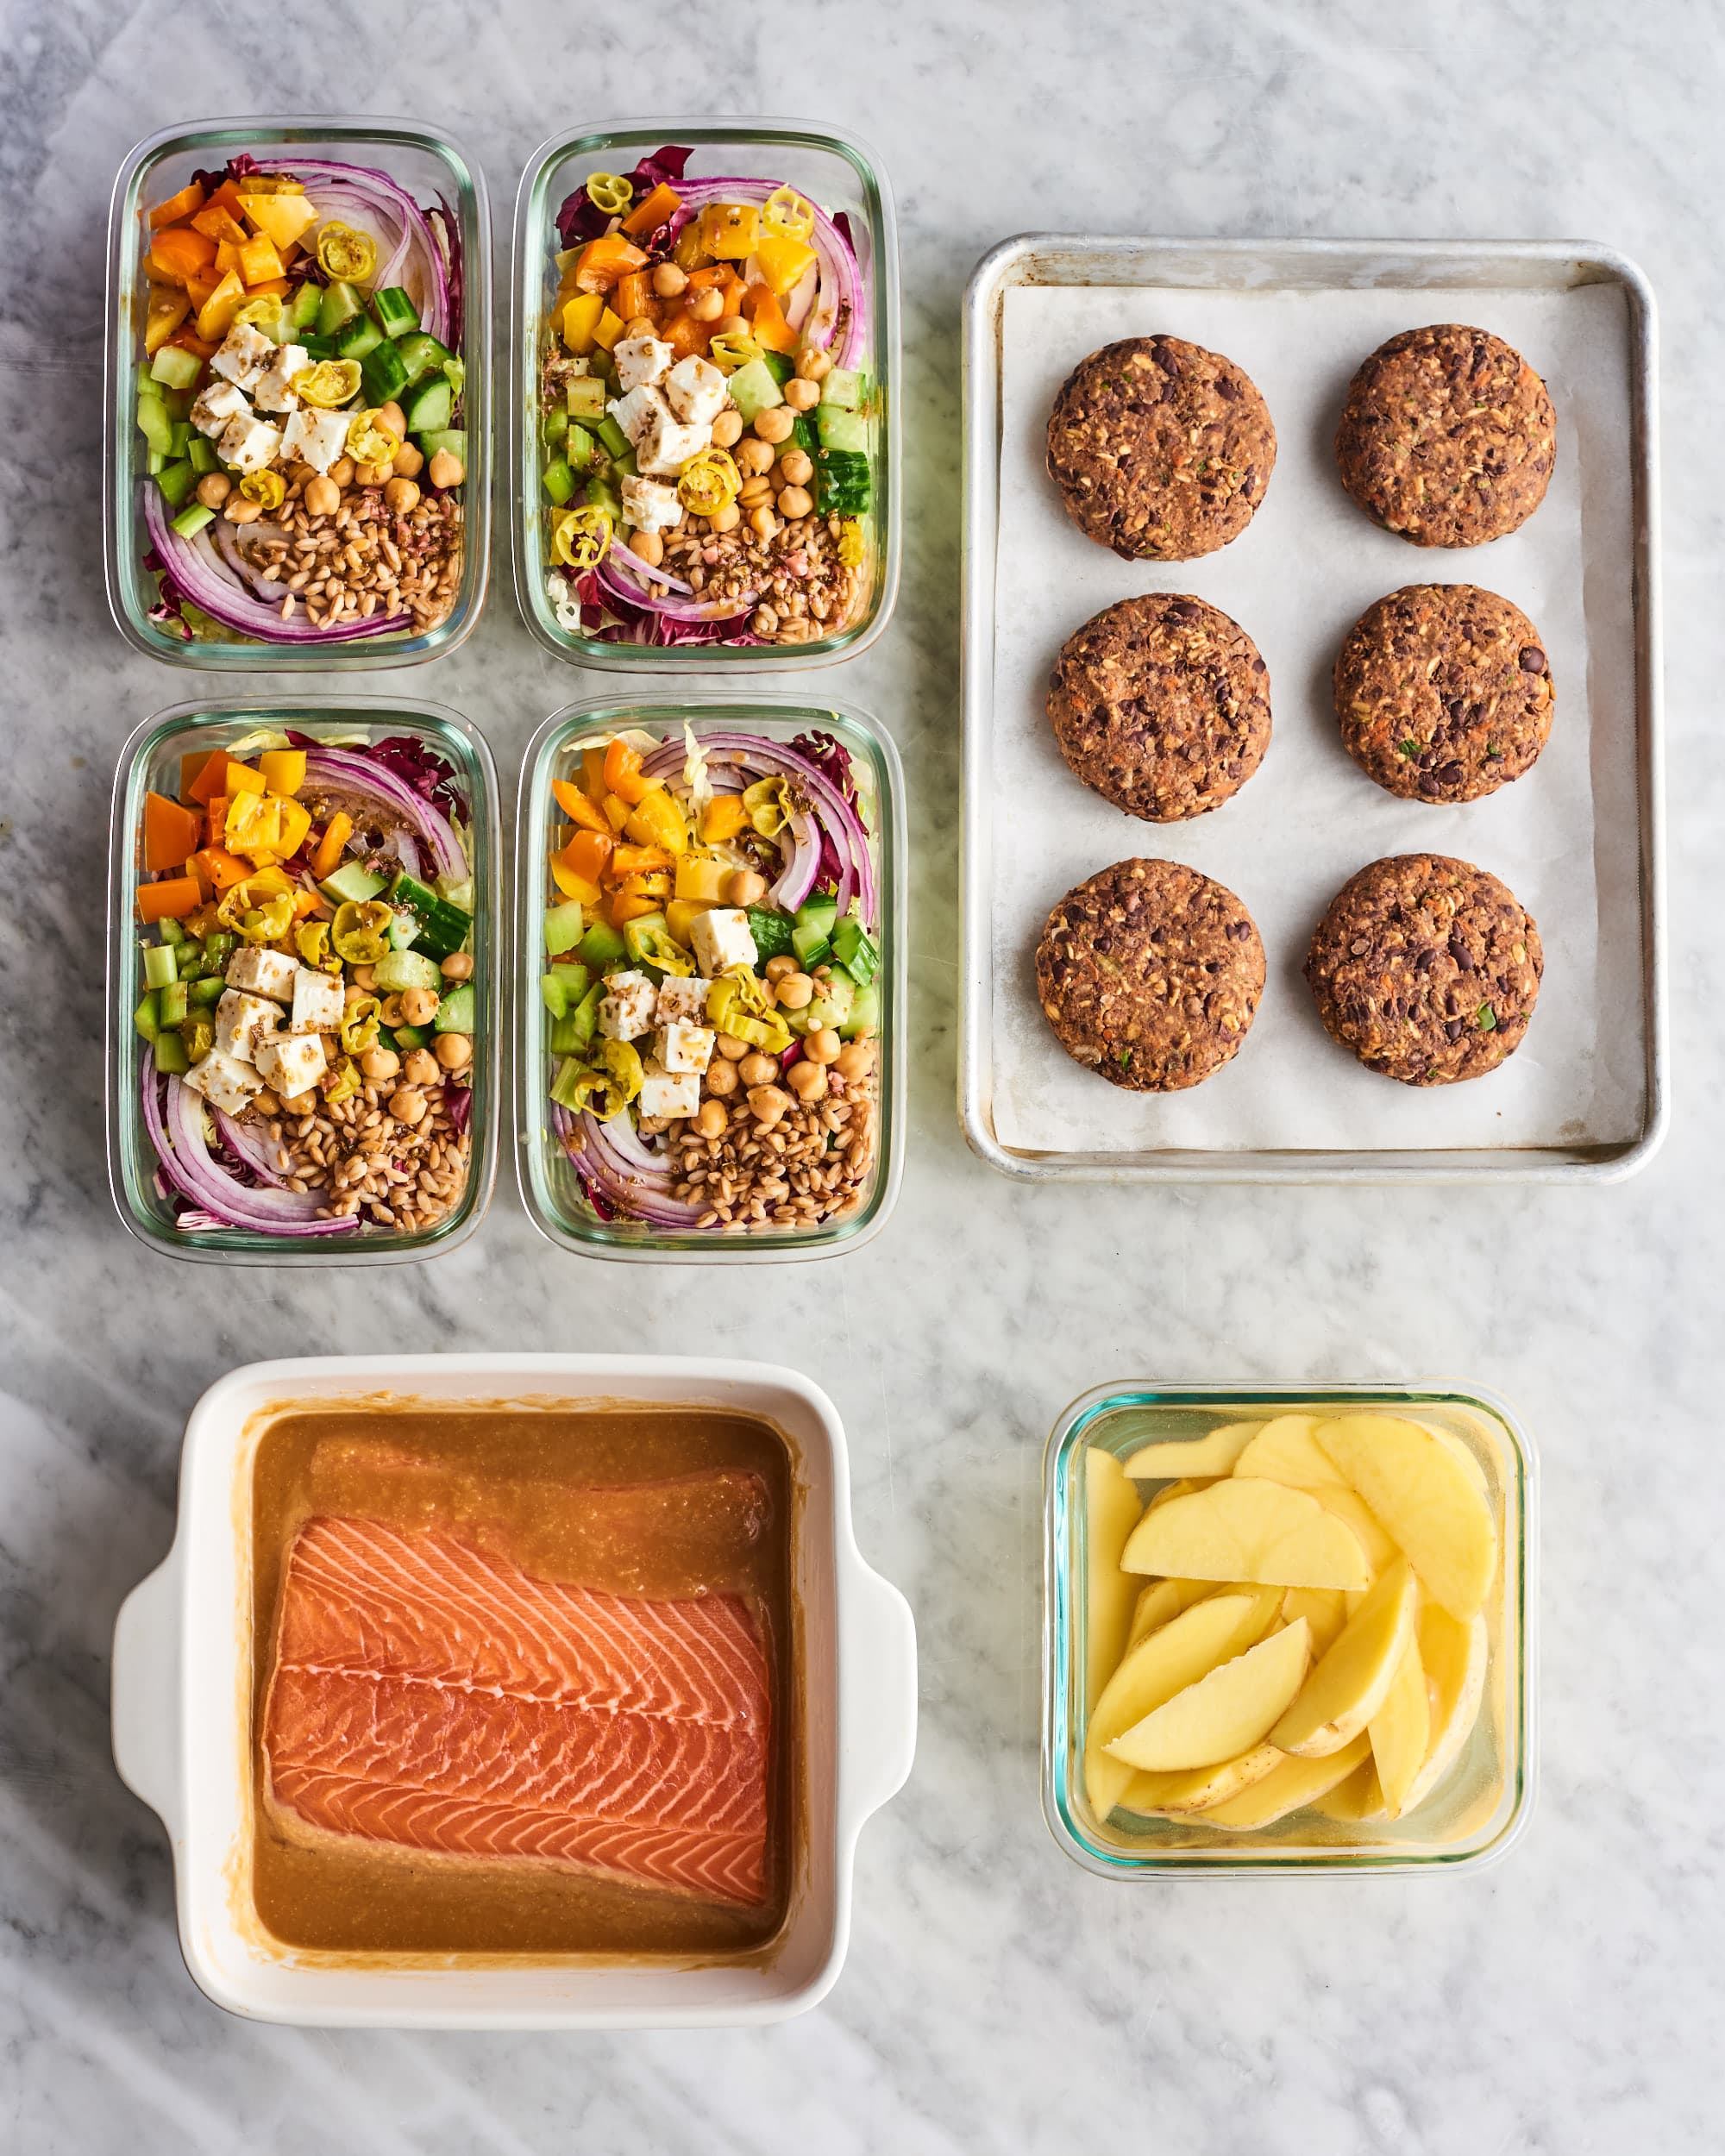 How to Try the 'Component Cooking' Hack for Easy Meal Prep